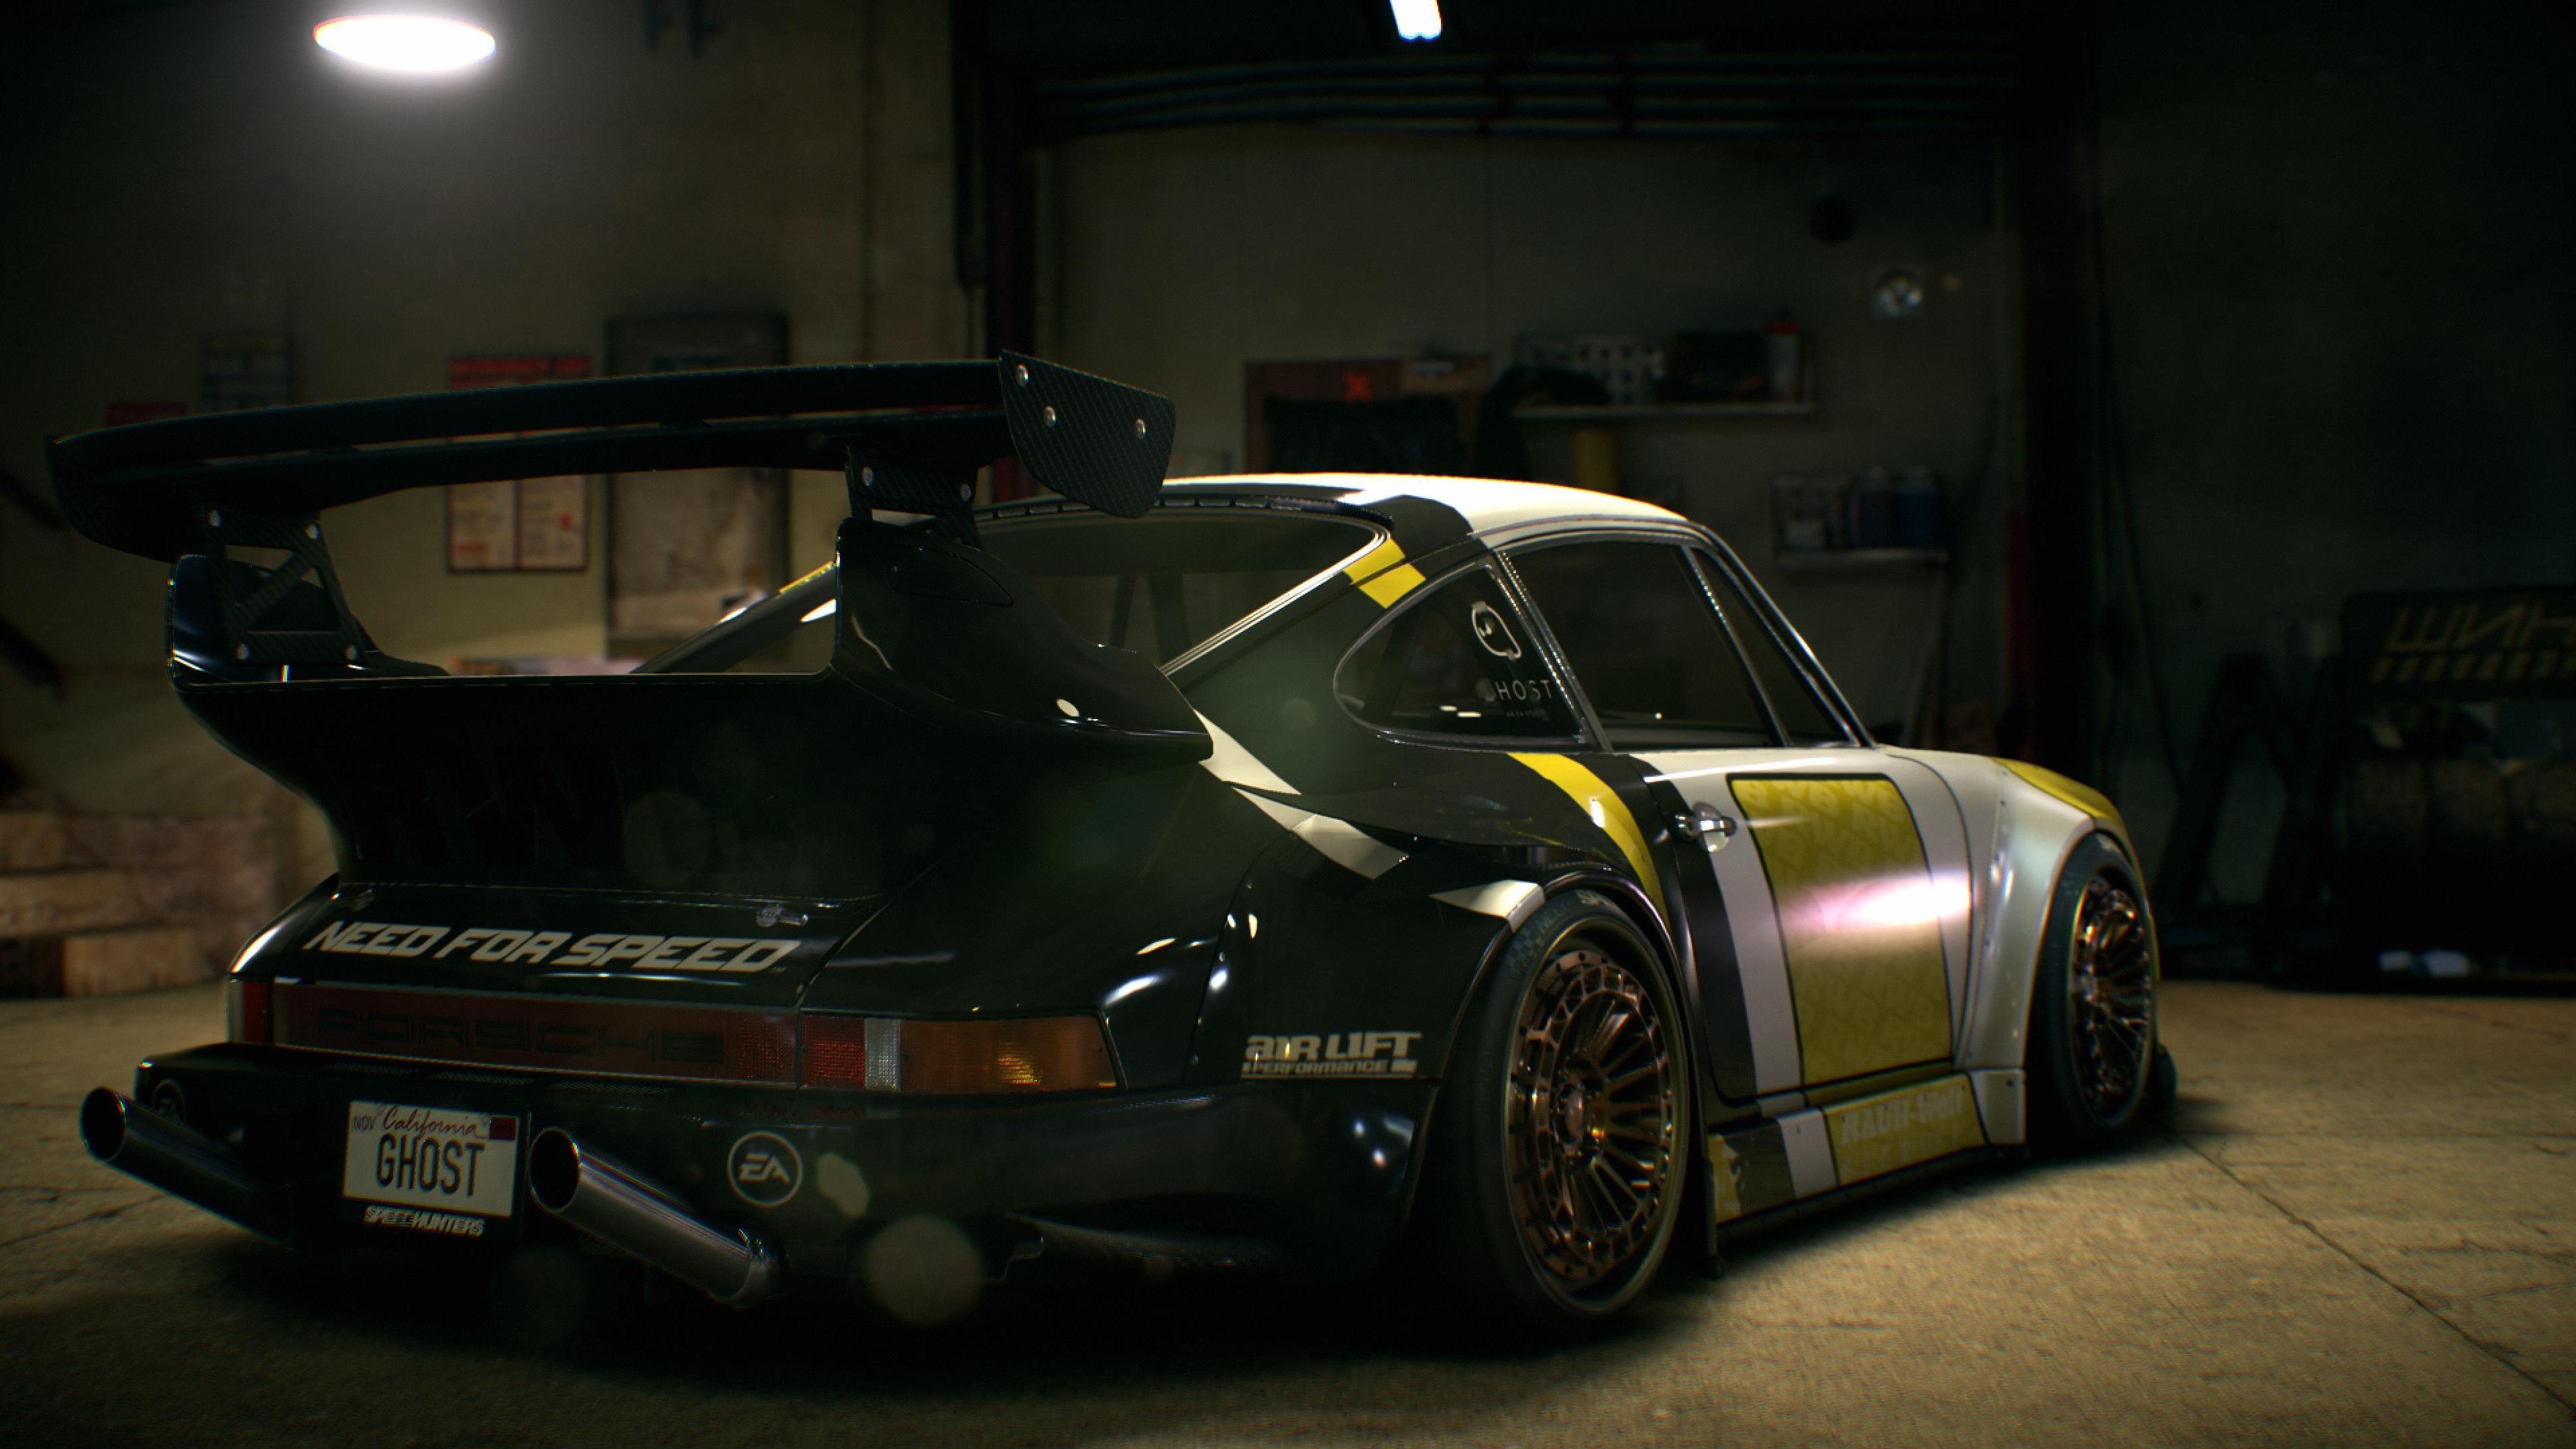 Need For Speed Porsche Ghost for 3840 x 2160 Ultra HD resolution